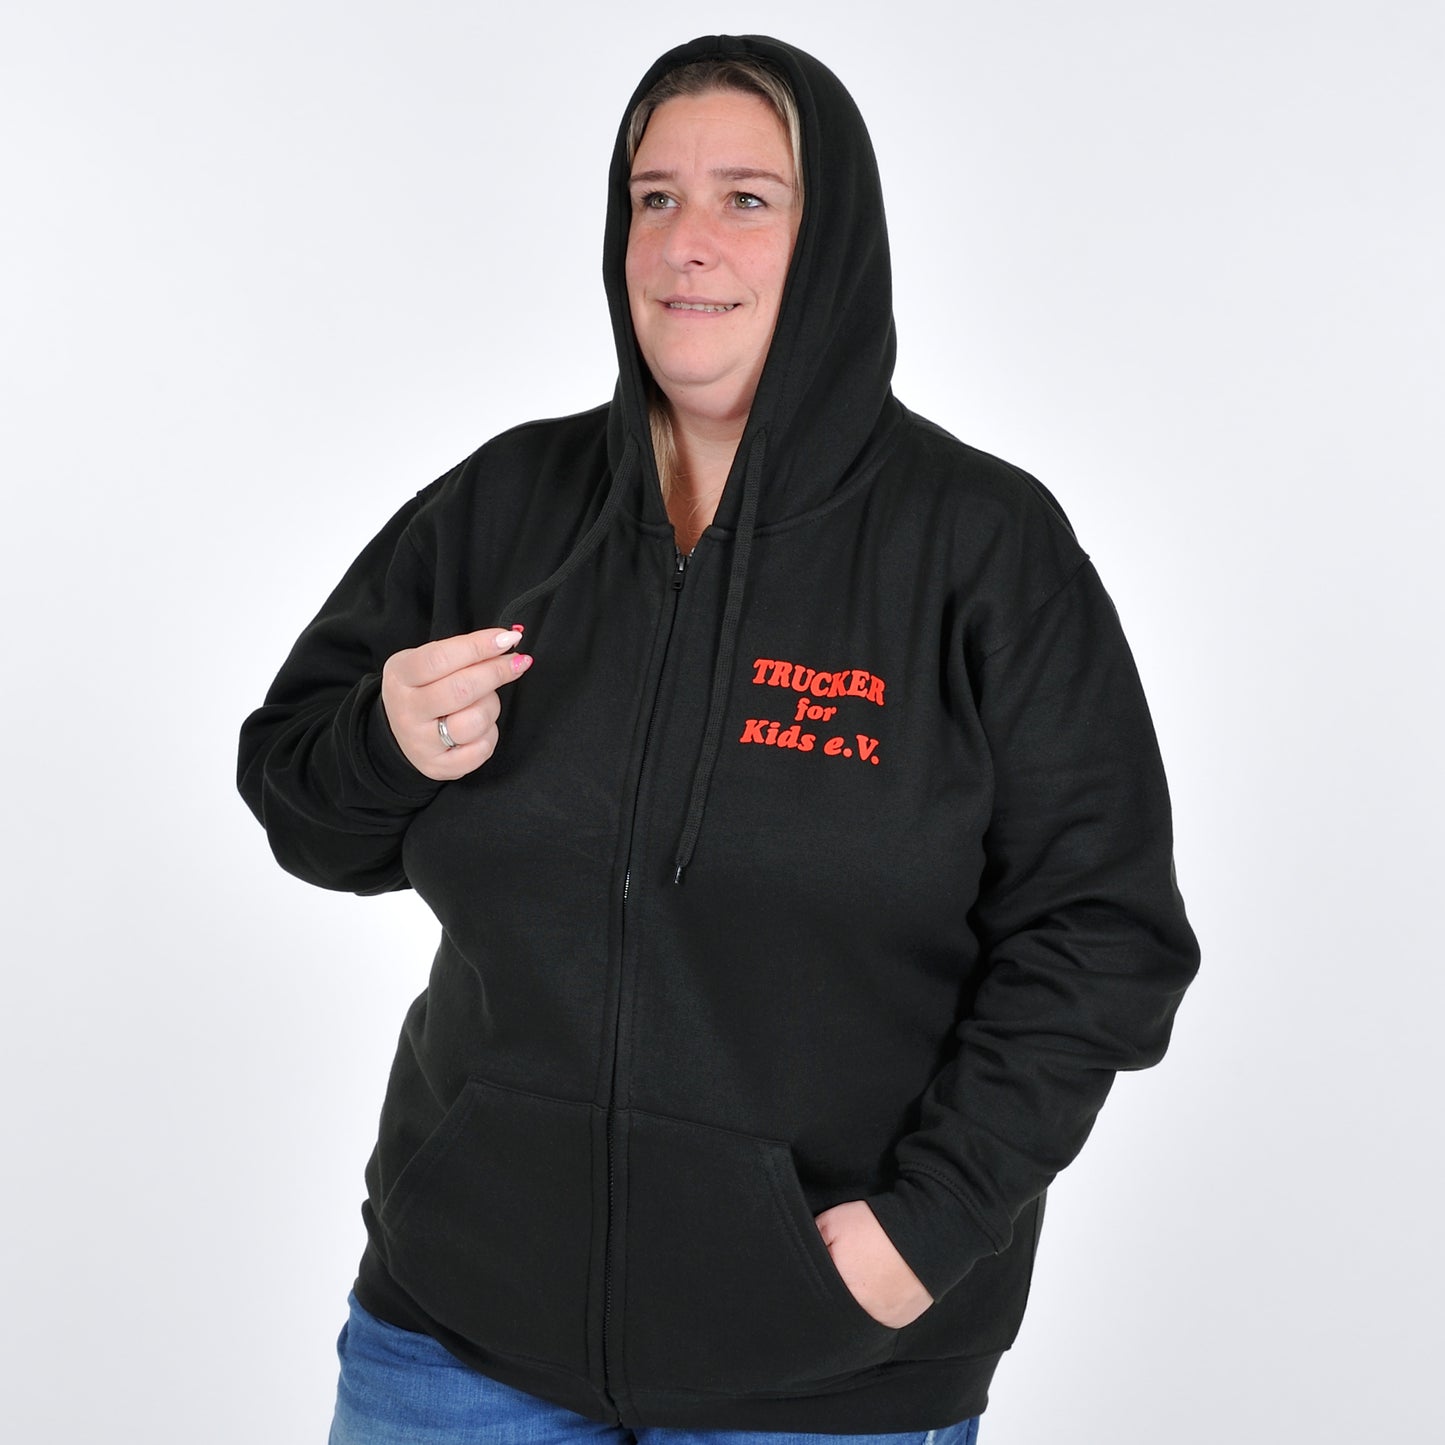 Vereins - Sweats jacket with zipper old price 39,00€ now only 36,50€